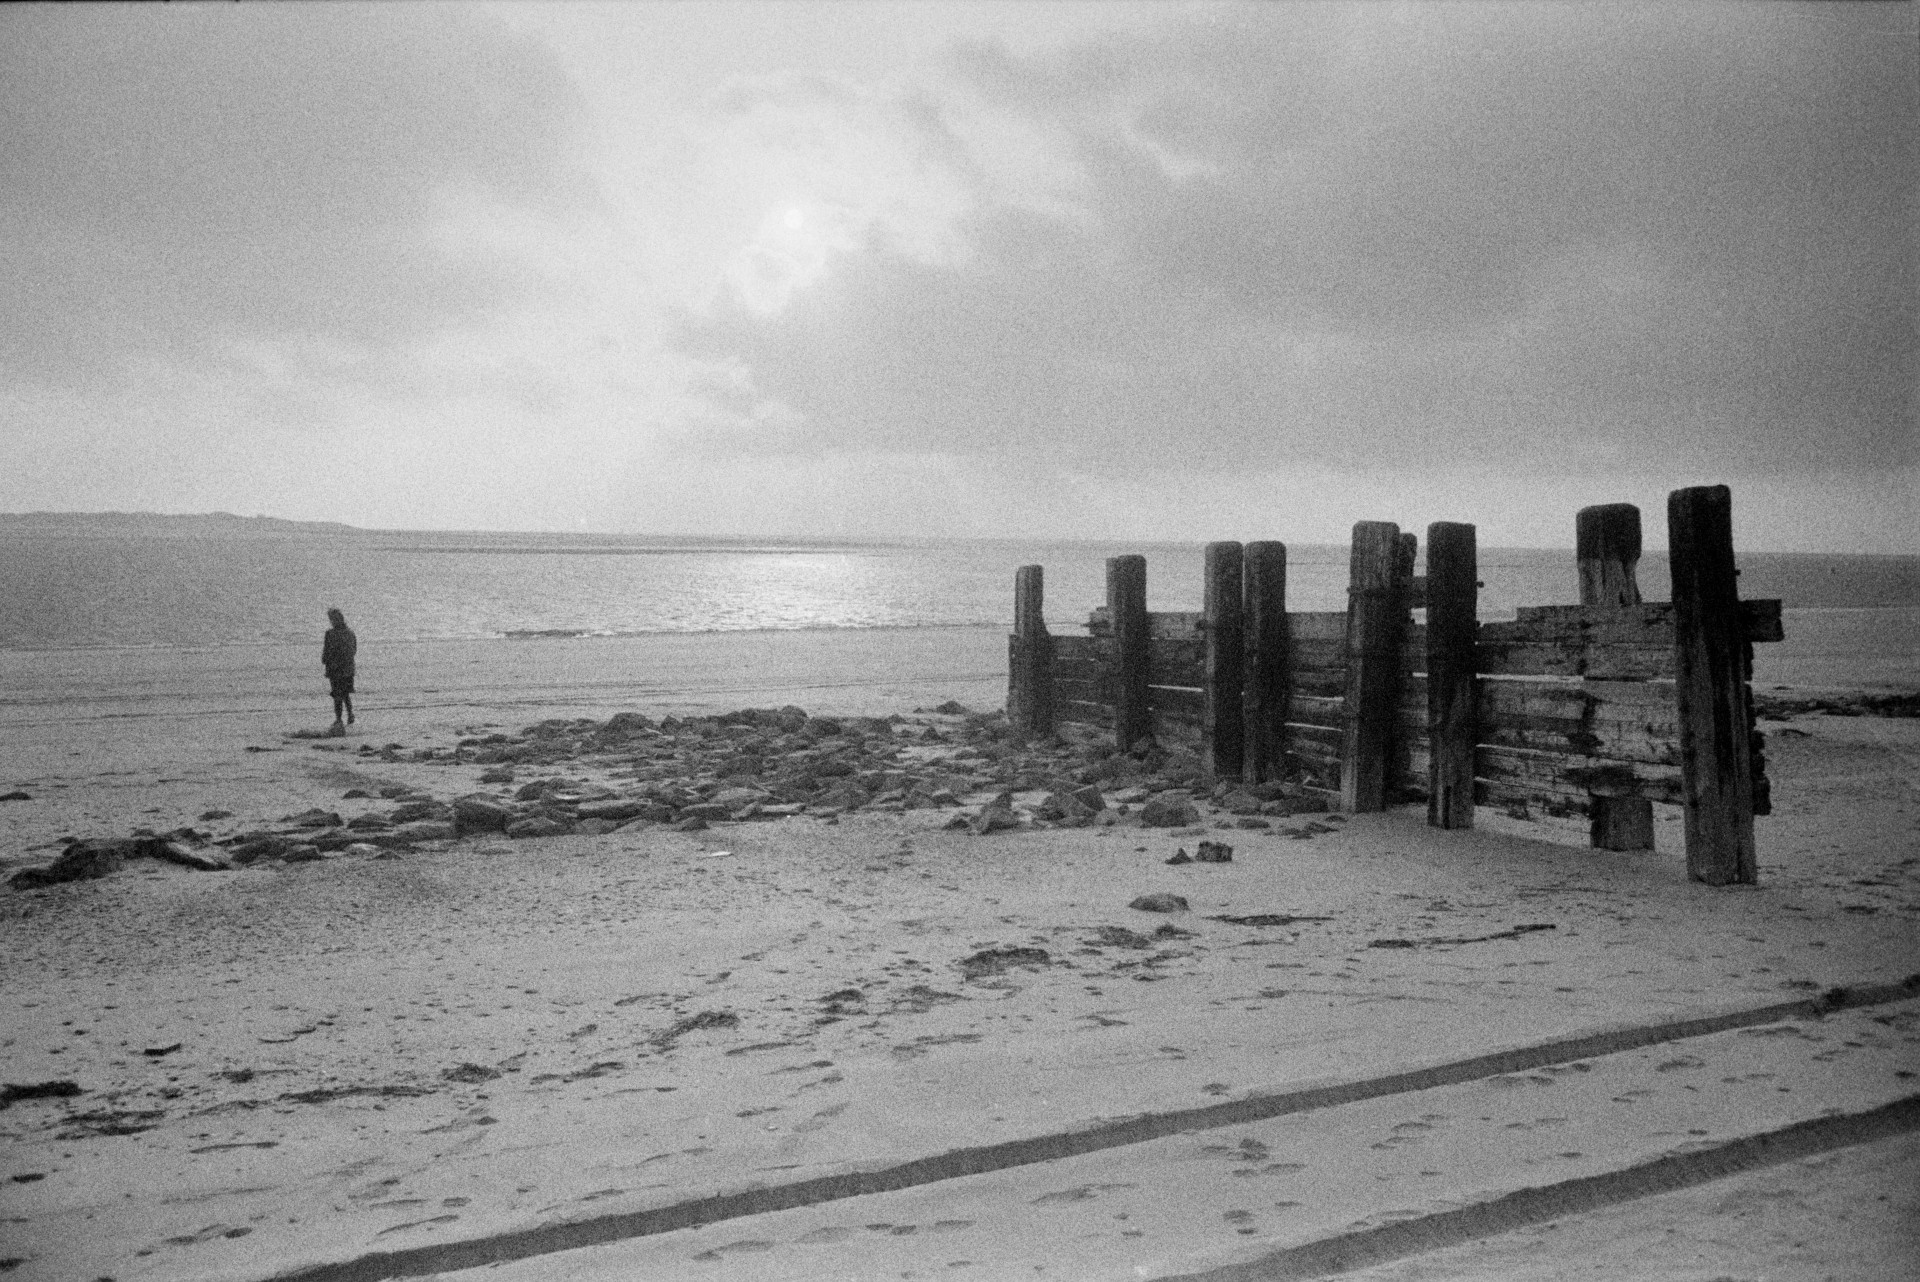 A person walking along the beach by a wooden groyne at Saunton Sands.